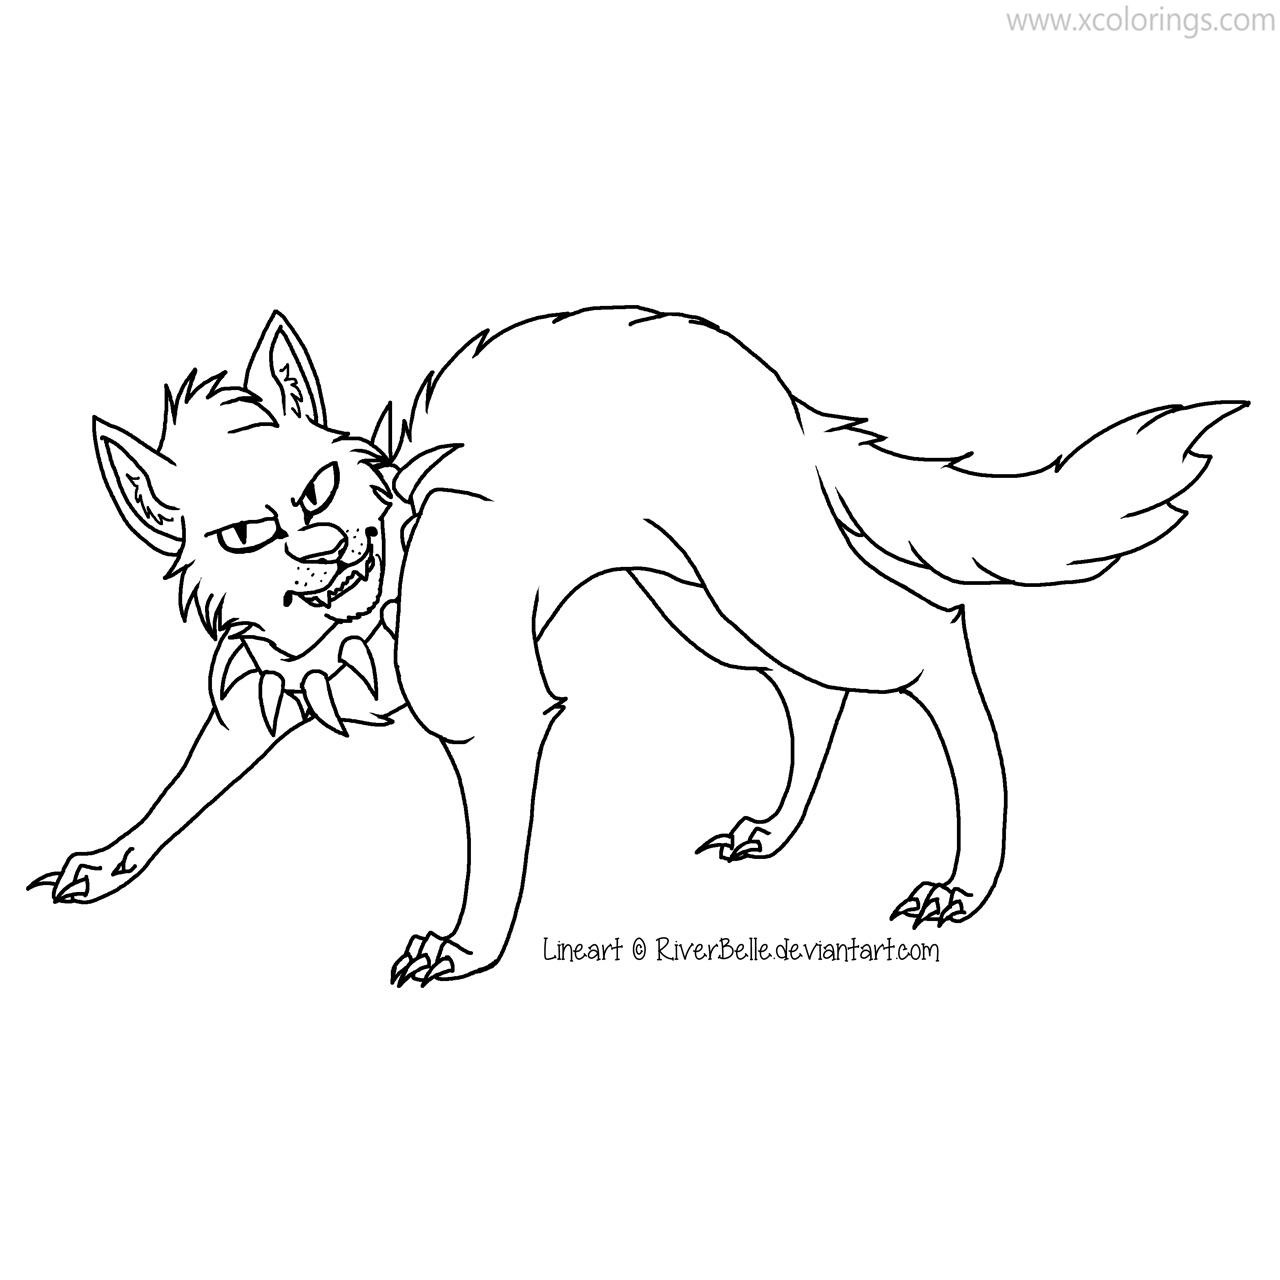 Free Warrior Cat Coloring Pages Fan Artwork by Riverbelle printable